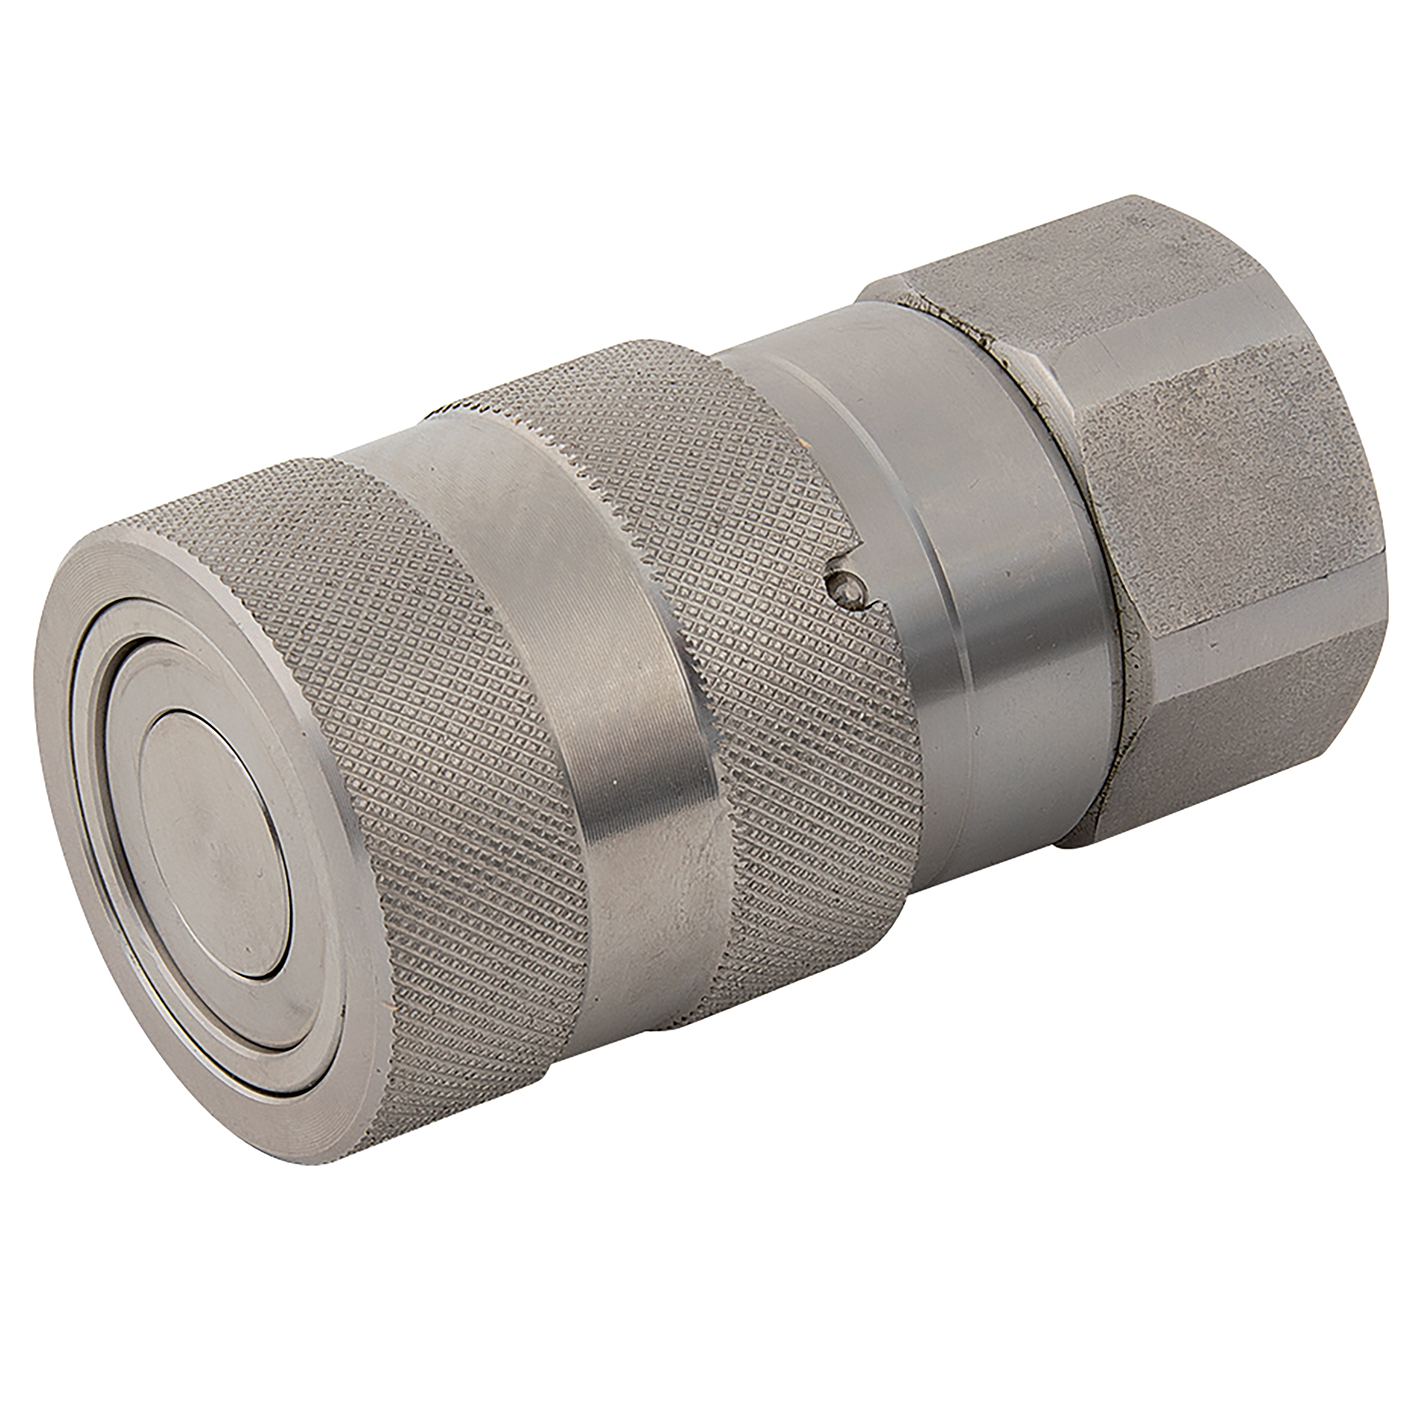 3/4" BSPP Female Flat Faced Coupling